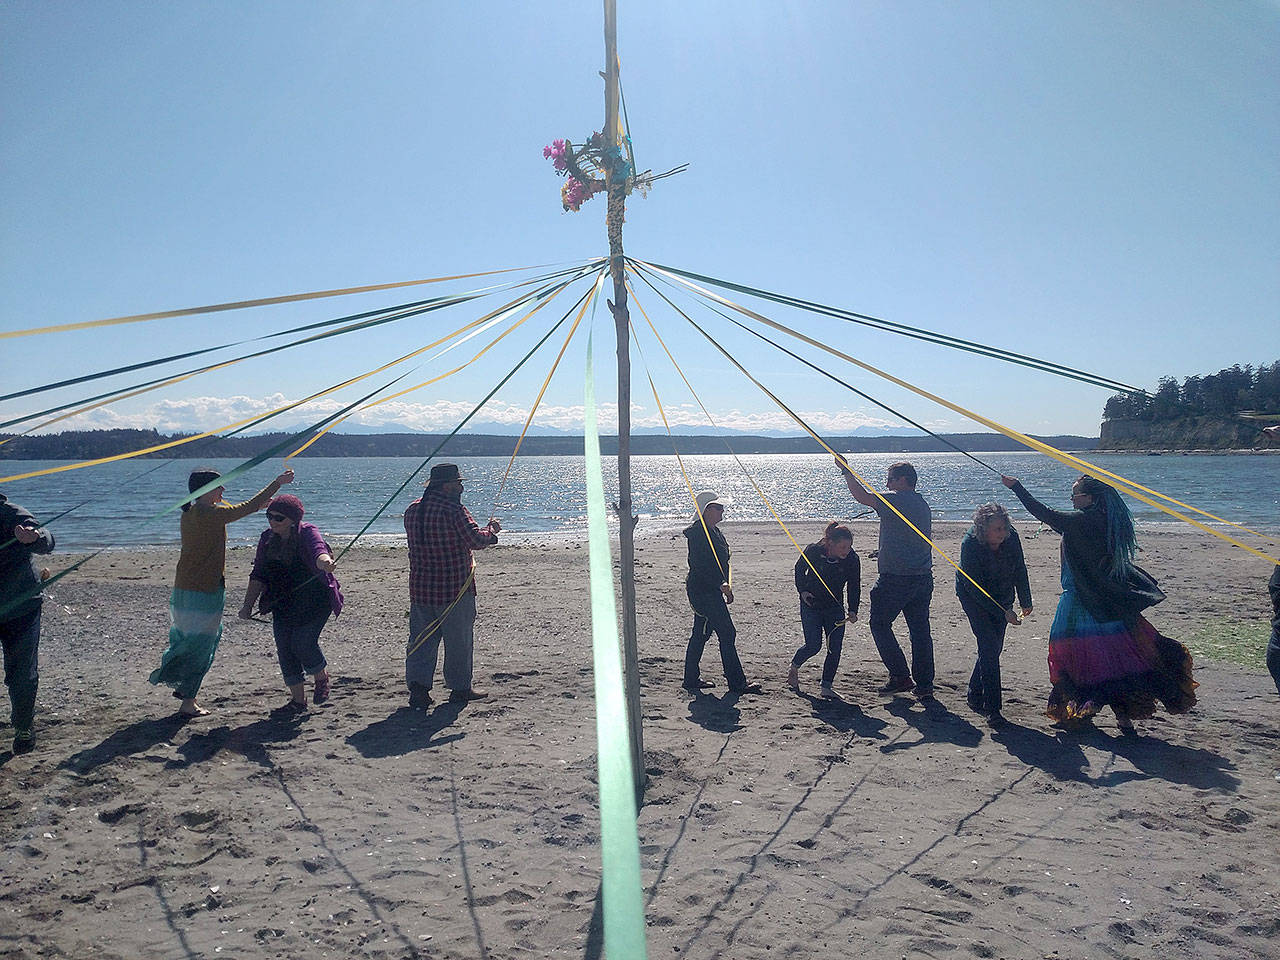 Photo submitted                                Members of the group Whidbey Witches, Heathens, Druids & Pagans celebrate with a maypole on the beach. The group is holding a pagan pride festival this weekend.